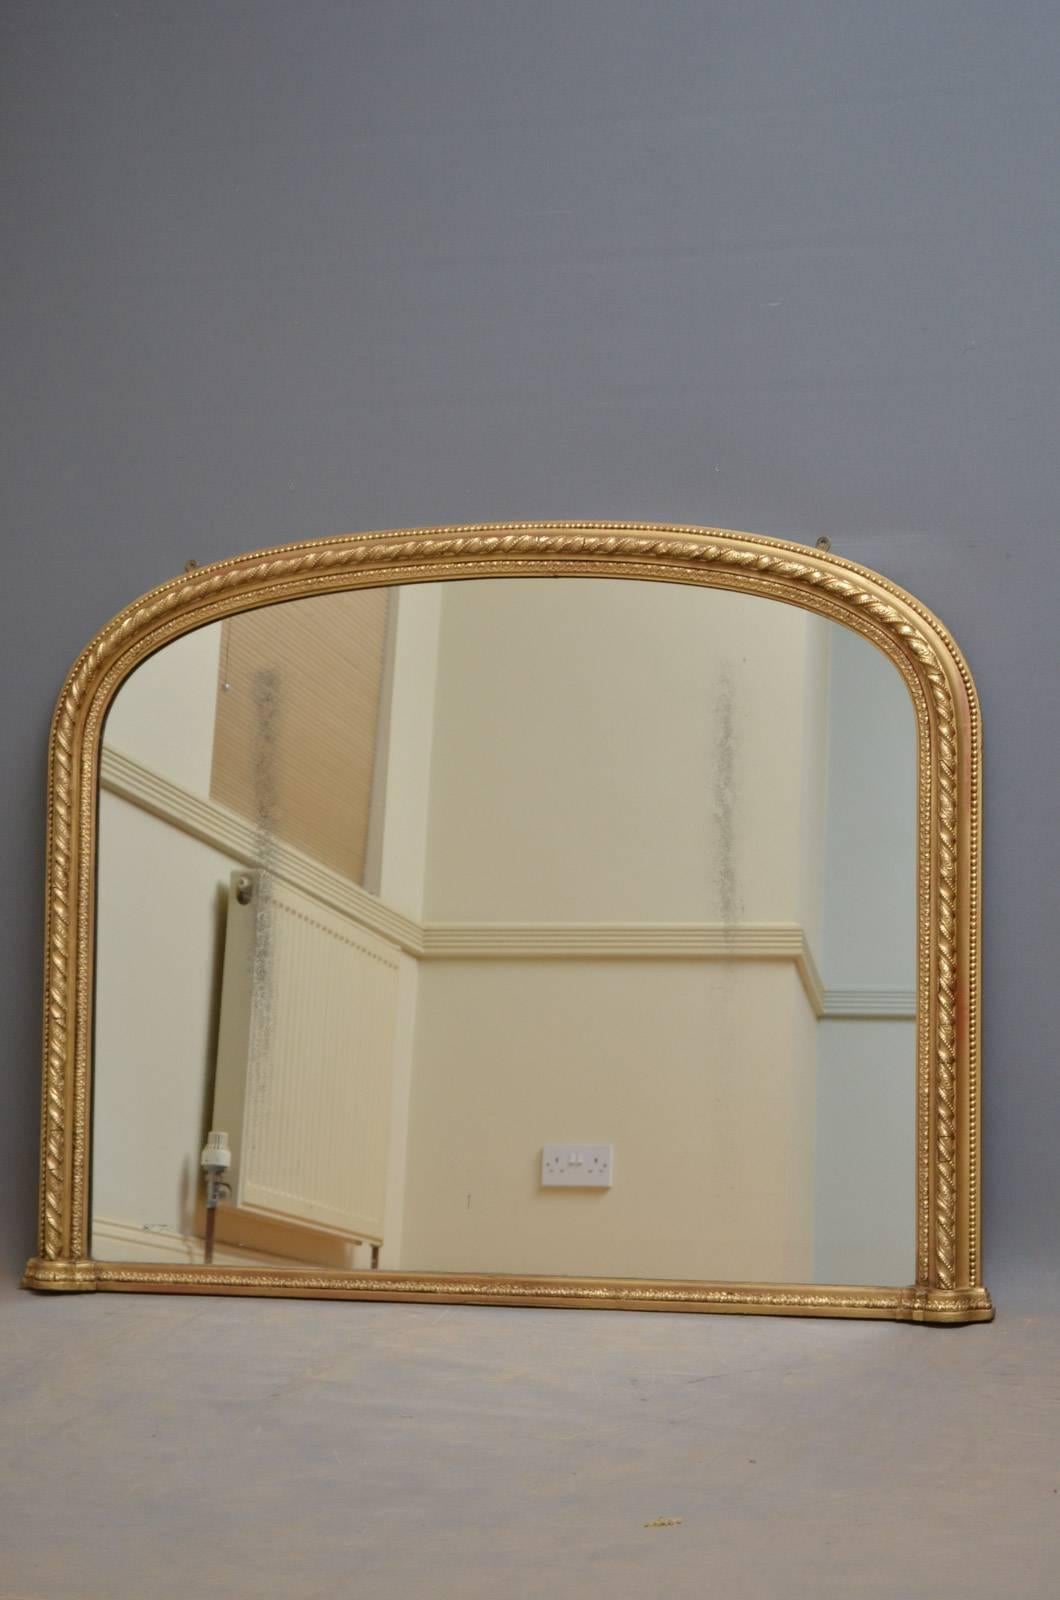 K0244 Victorian gilt overmantel of arched form with original mirror plate in twisted rope decorated and beaded frame. This mirror has been refinished and is in wonderful condition throughout, ready to place at home. This mirror bears maker's label